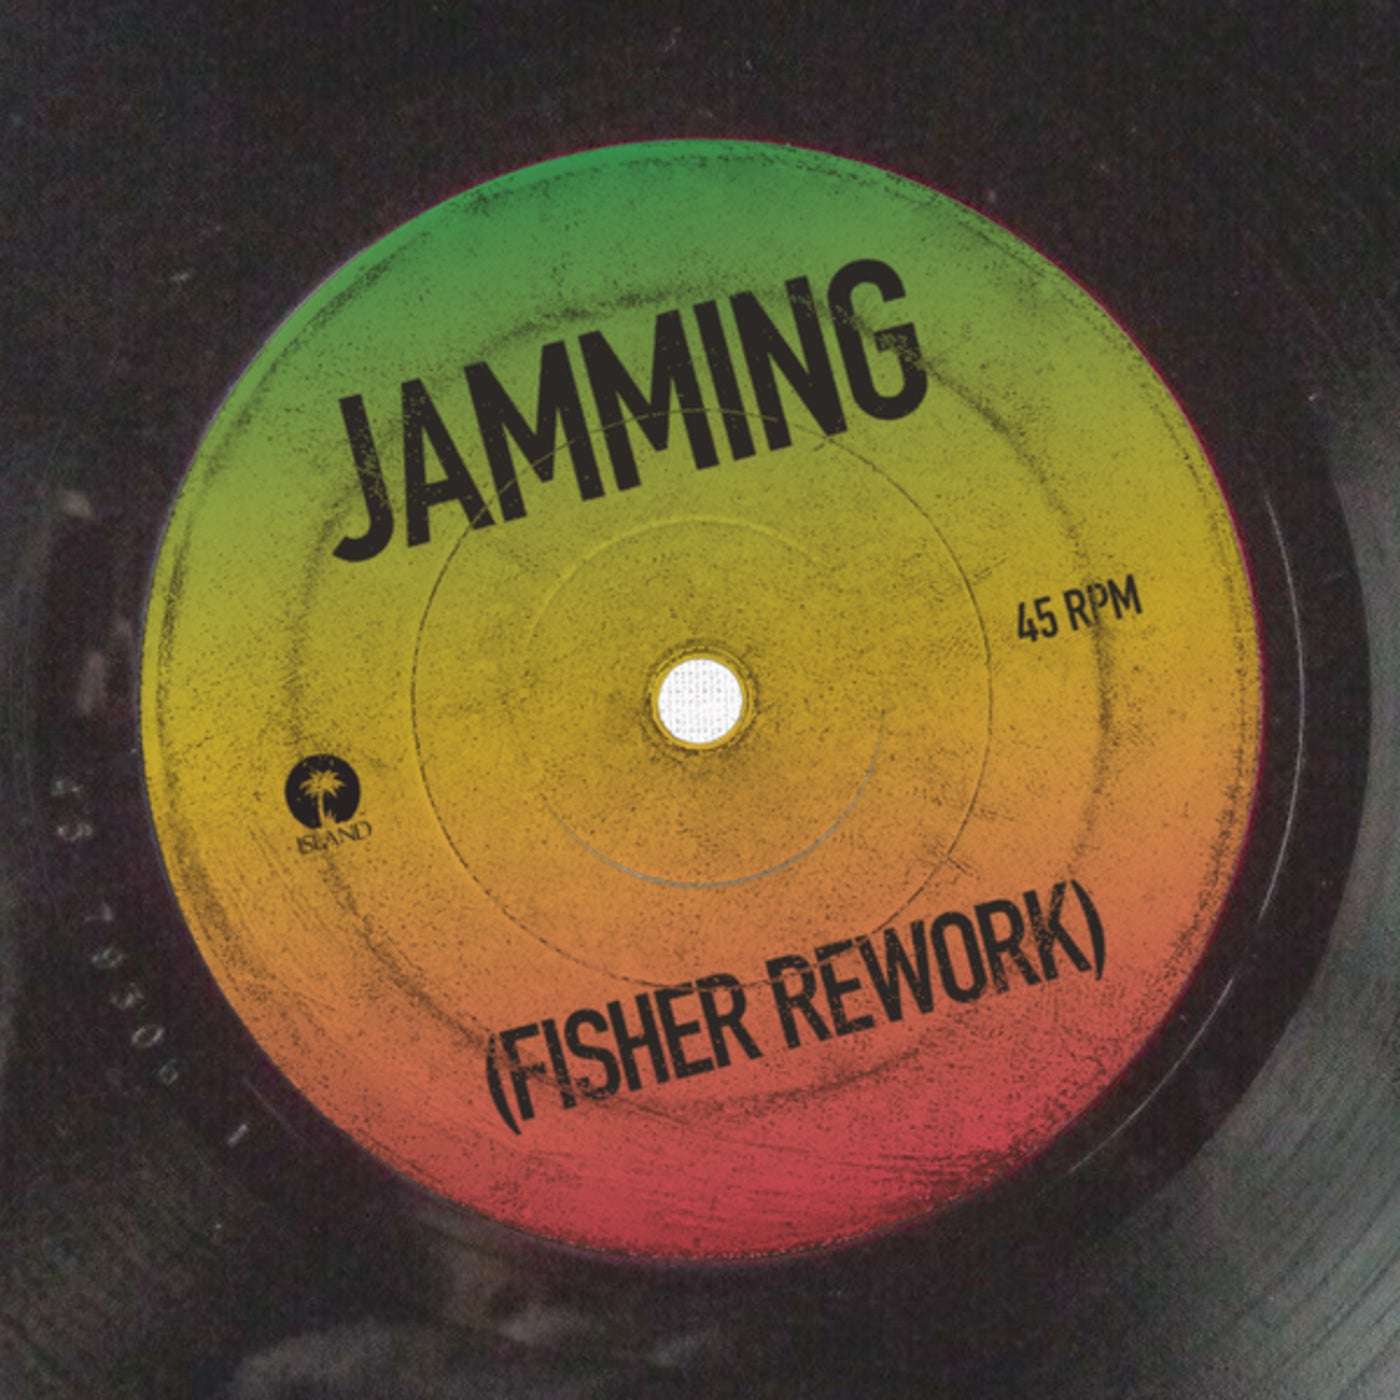 image cover: Bob Marley & The Wailers, FISHER (OZ) - Jamming (FISHER Rework) on Tuff Gong